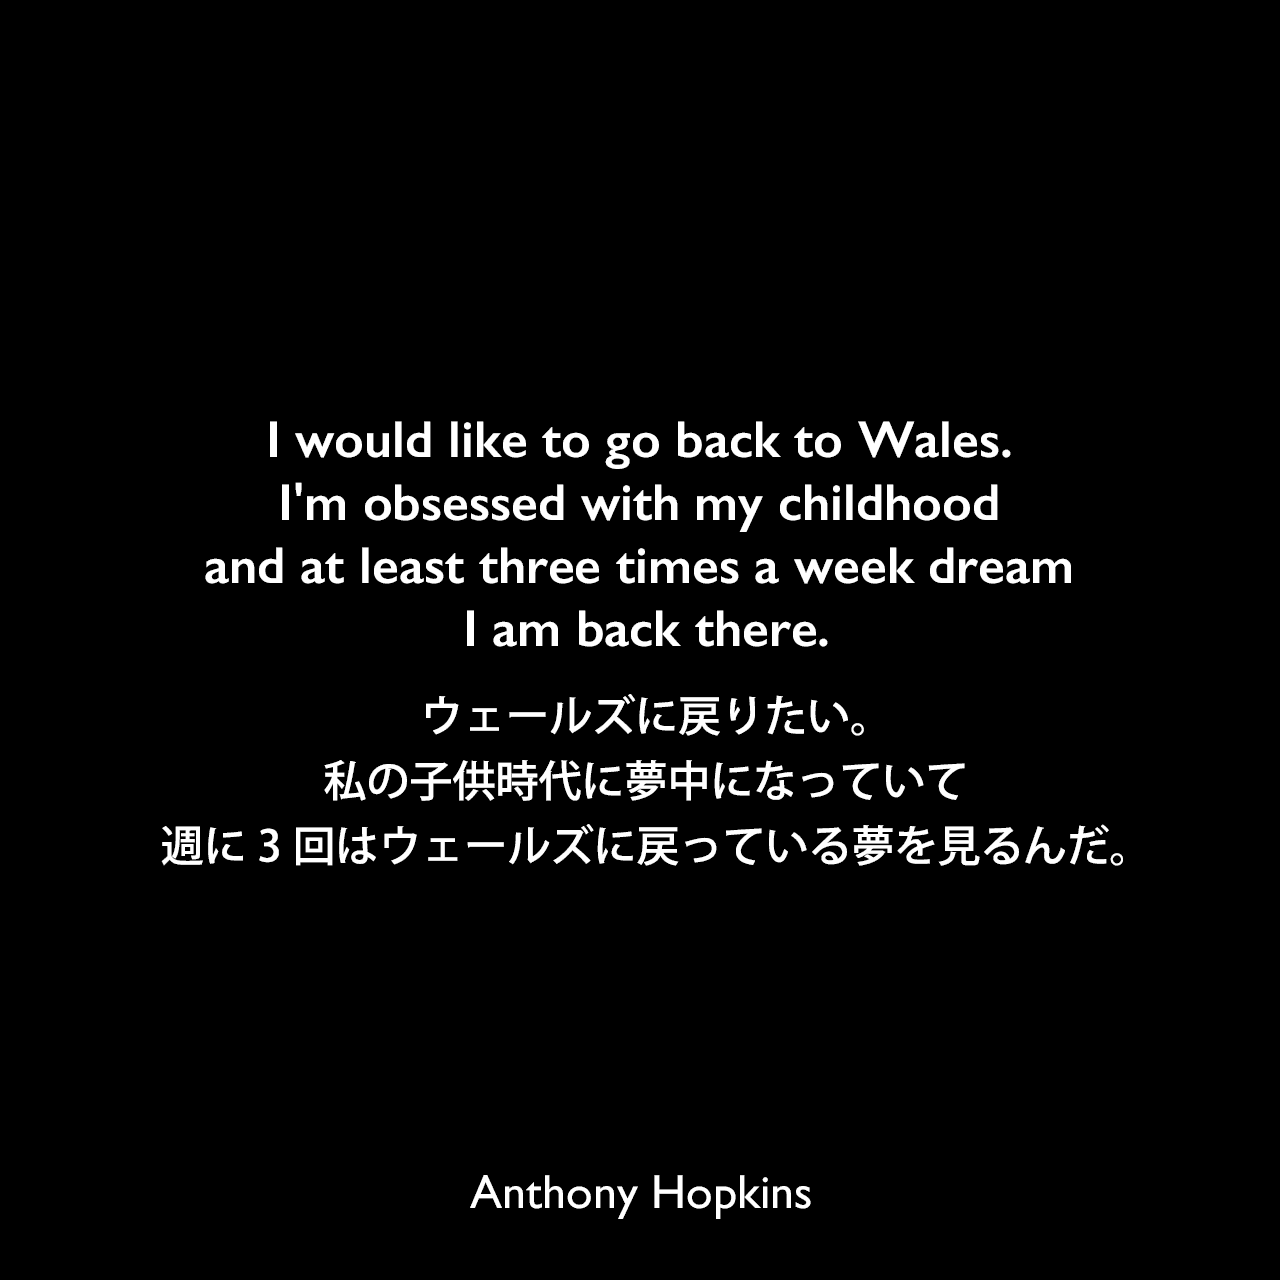 I would like to go back to Wales. I'm obsessed with my childhood and at least three times a week dream I am back there.ウェールズに戻りたい。私の子供時代に夢中になっていて週に3回はウェールズに戻っている夢を見るんだ。Anthony Hopkins